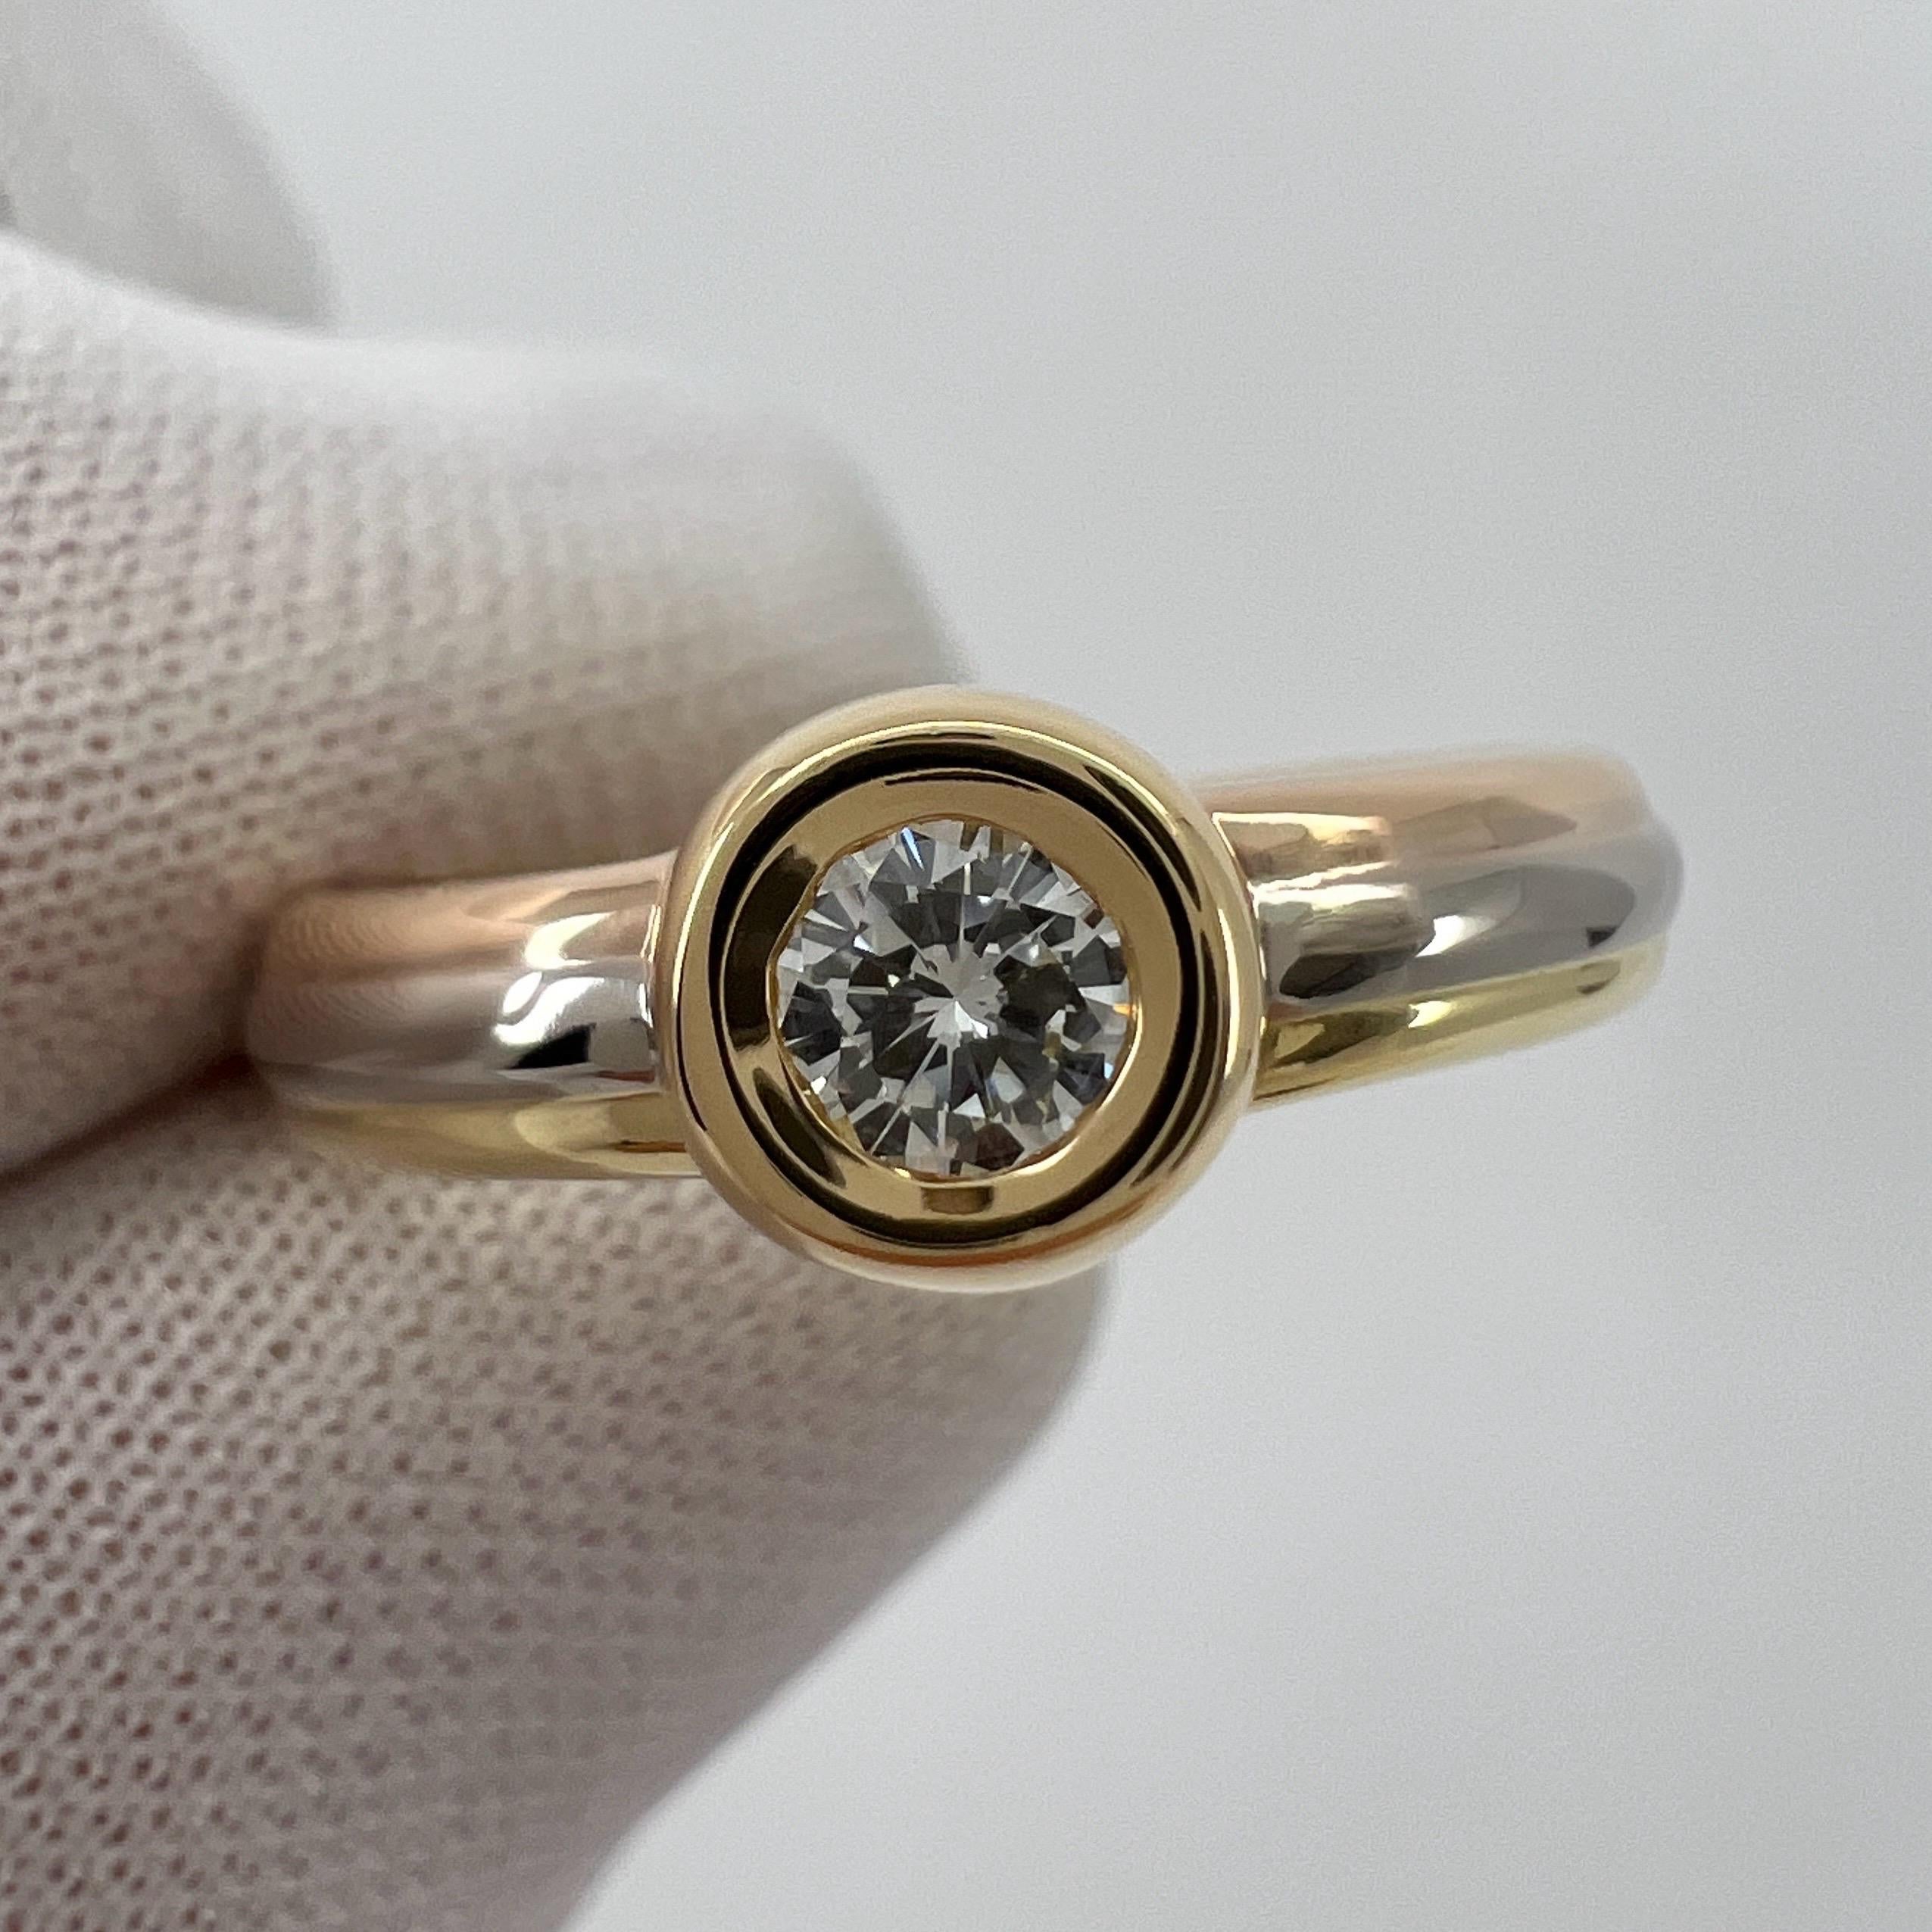 Vintage Cartier Round Cut Diamond 18k Tri Colour/Multi Tone Gold Solitaire Ring.

Stunning multi tone gold ring set with a fine natural round brilliant cut diamond. Fine jewellery houses like Cartier only use the finest of diamonds and this diamond